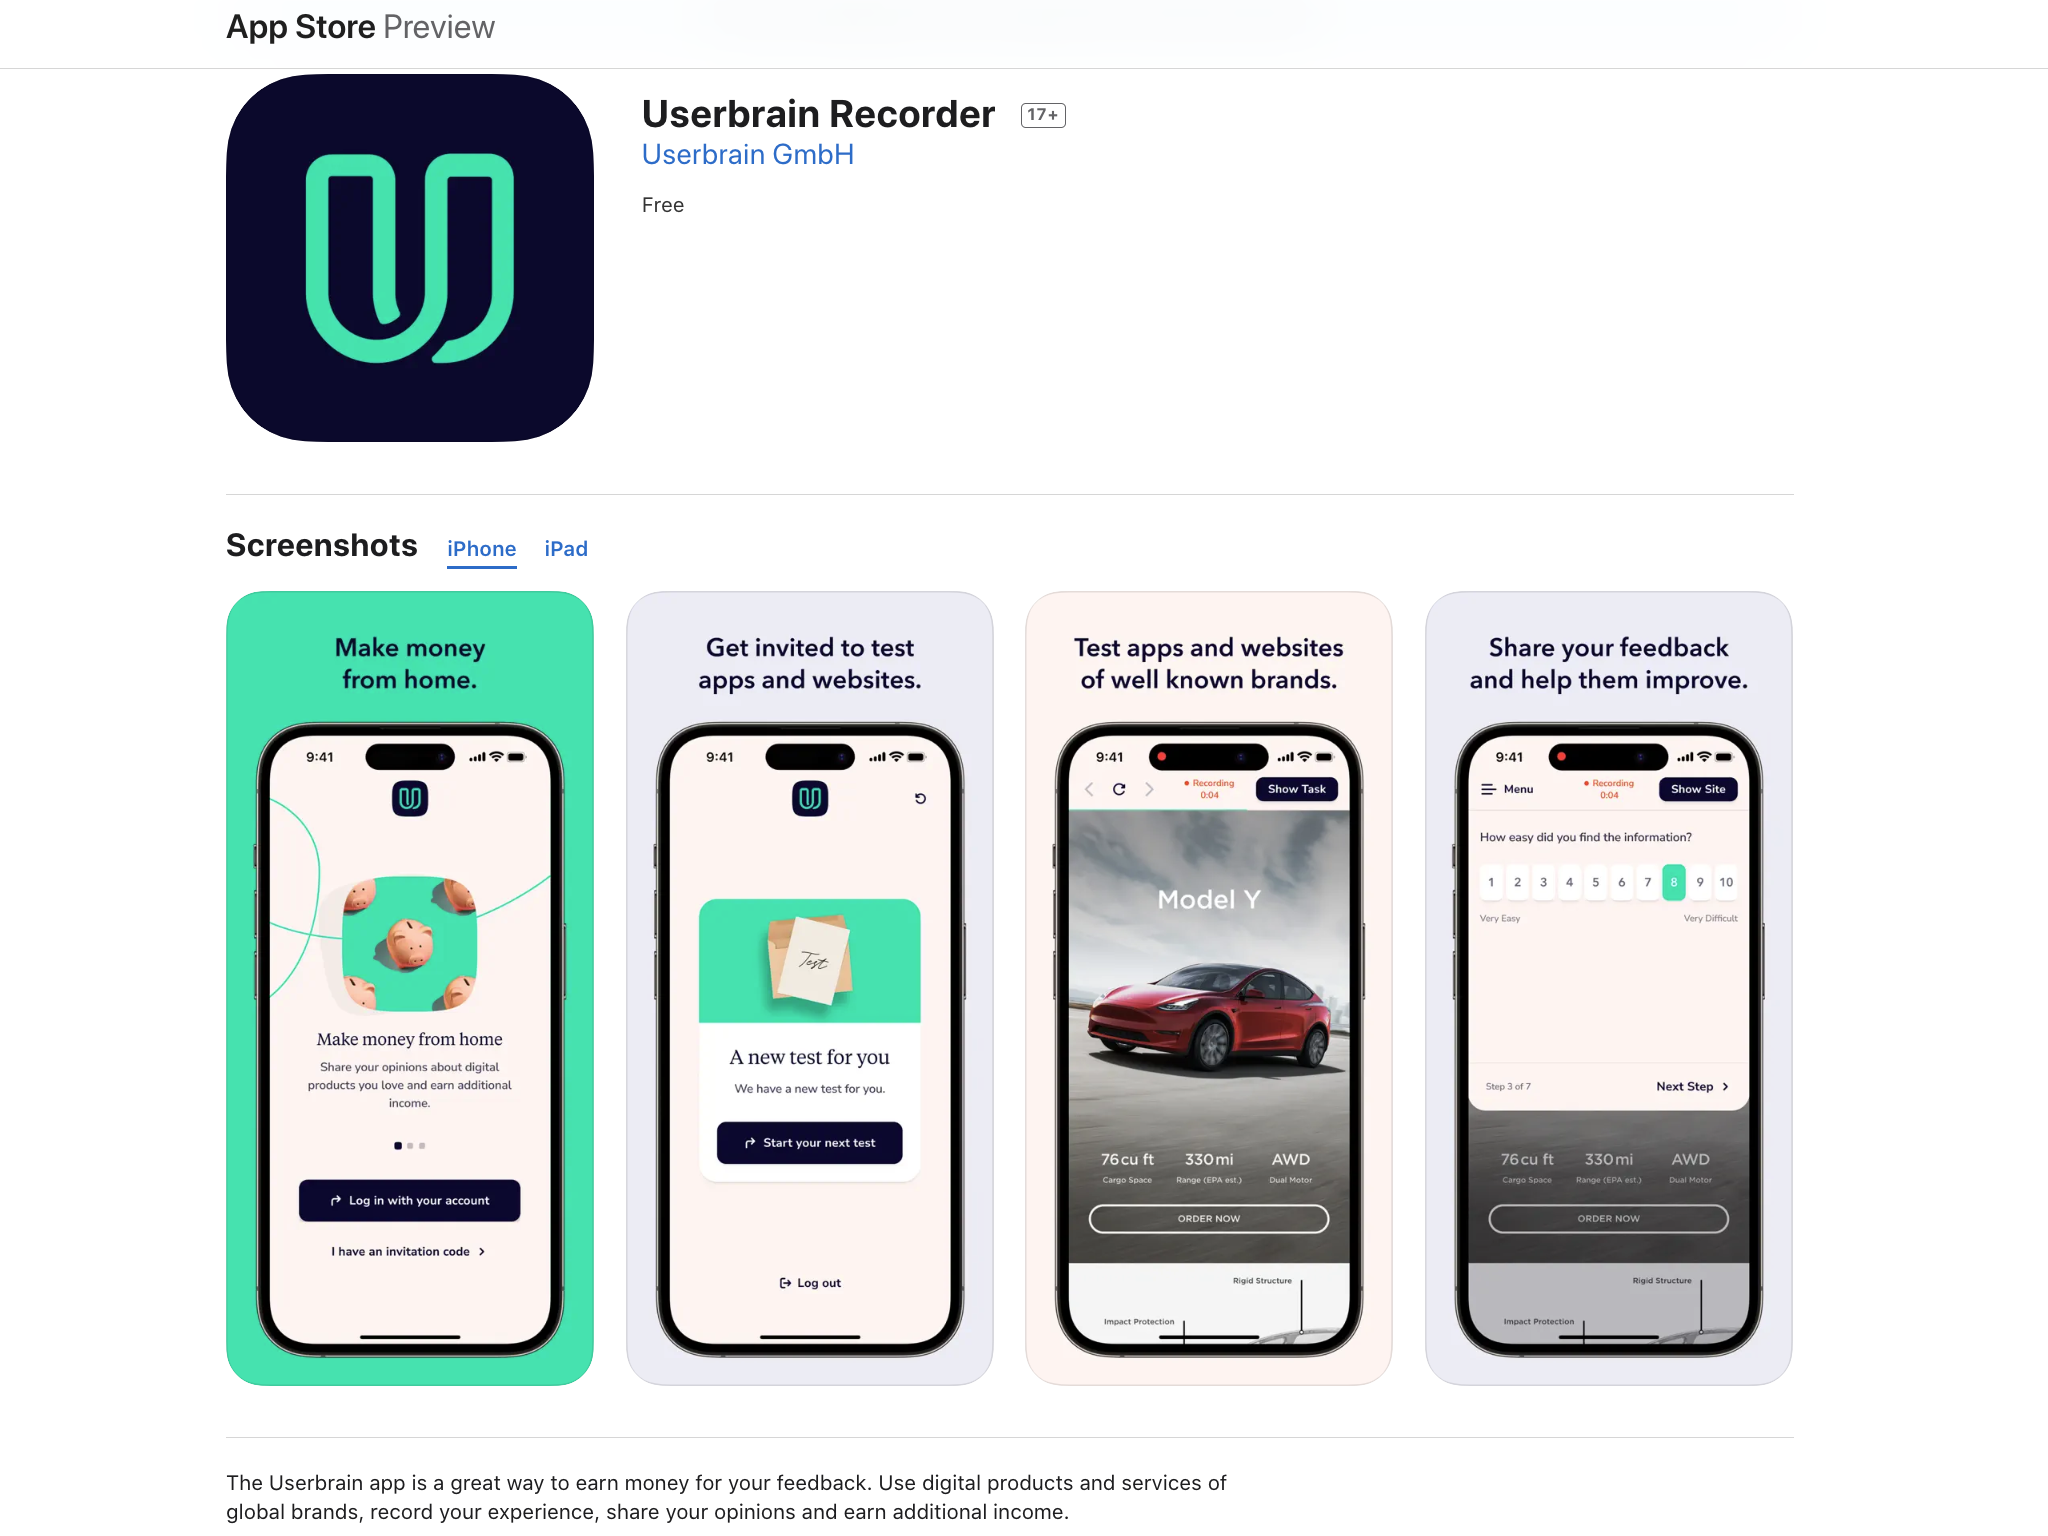 We launched the Userbrain iOS app this year